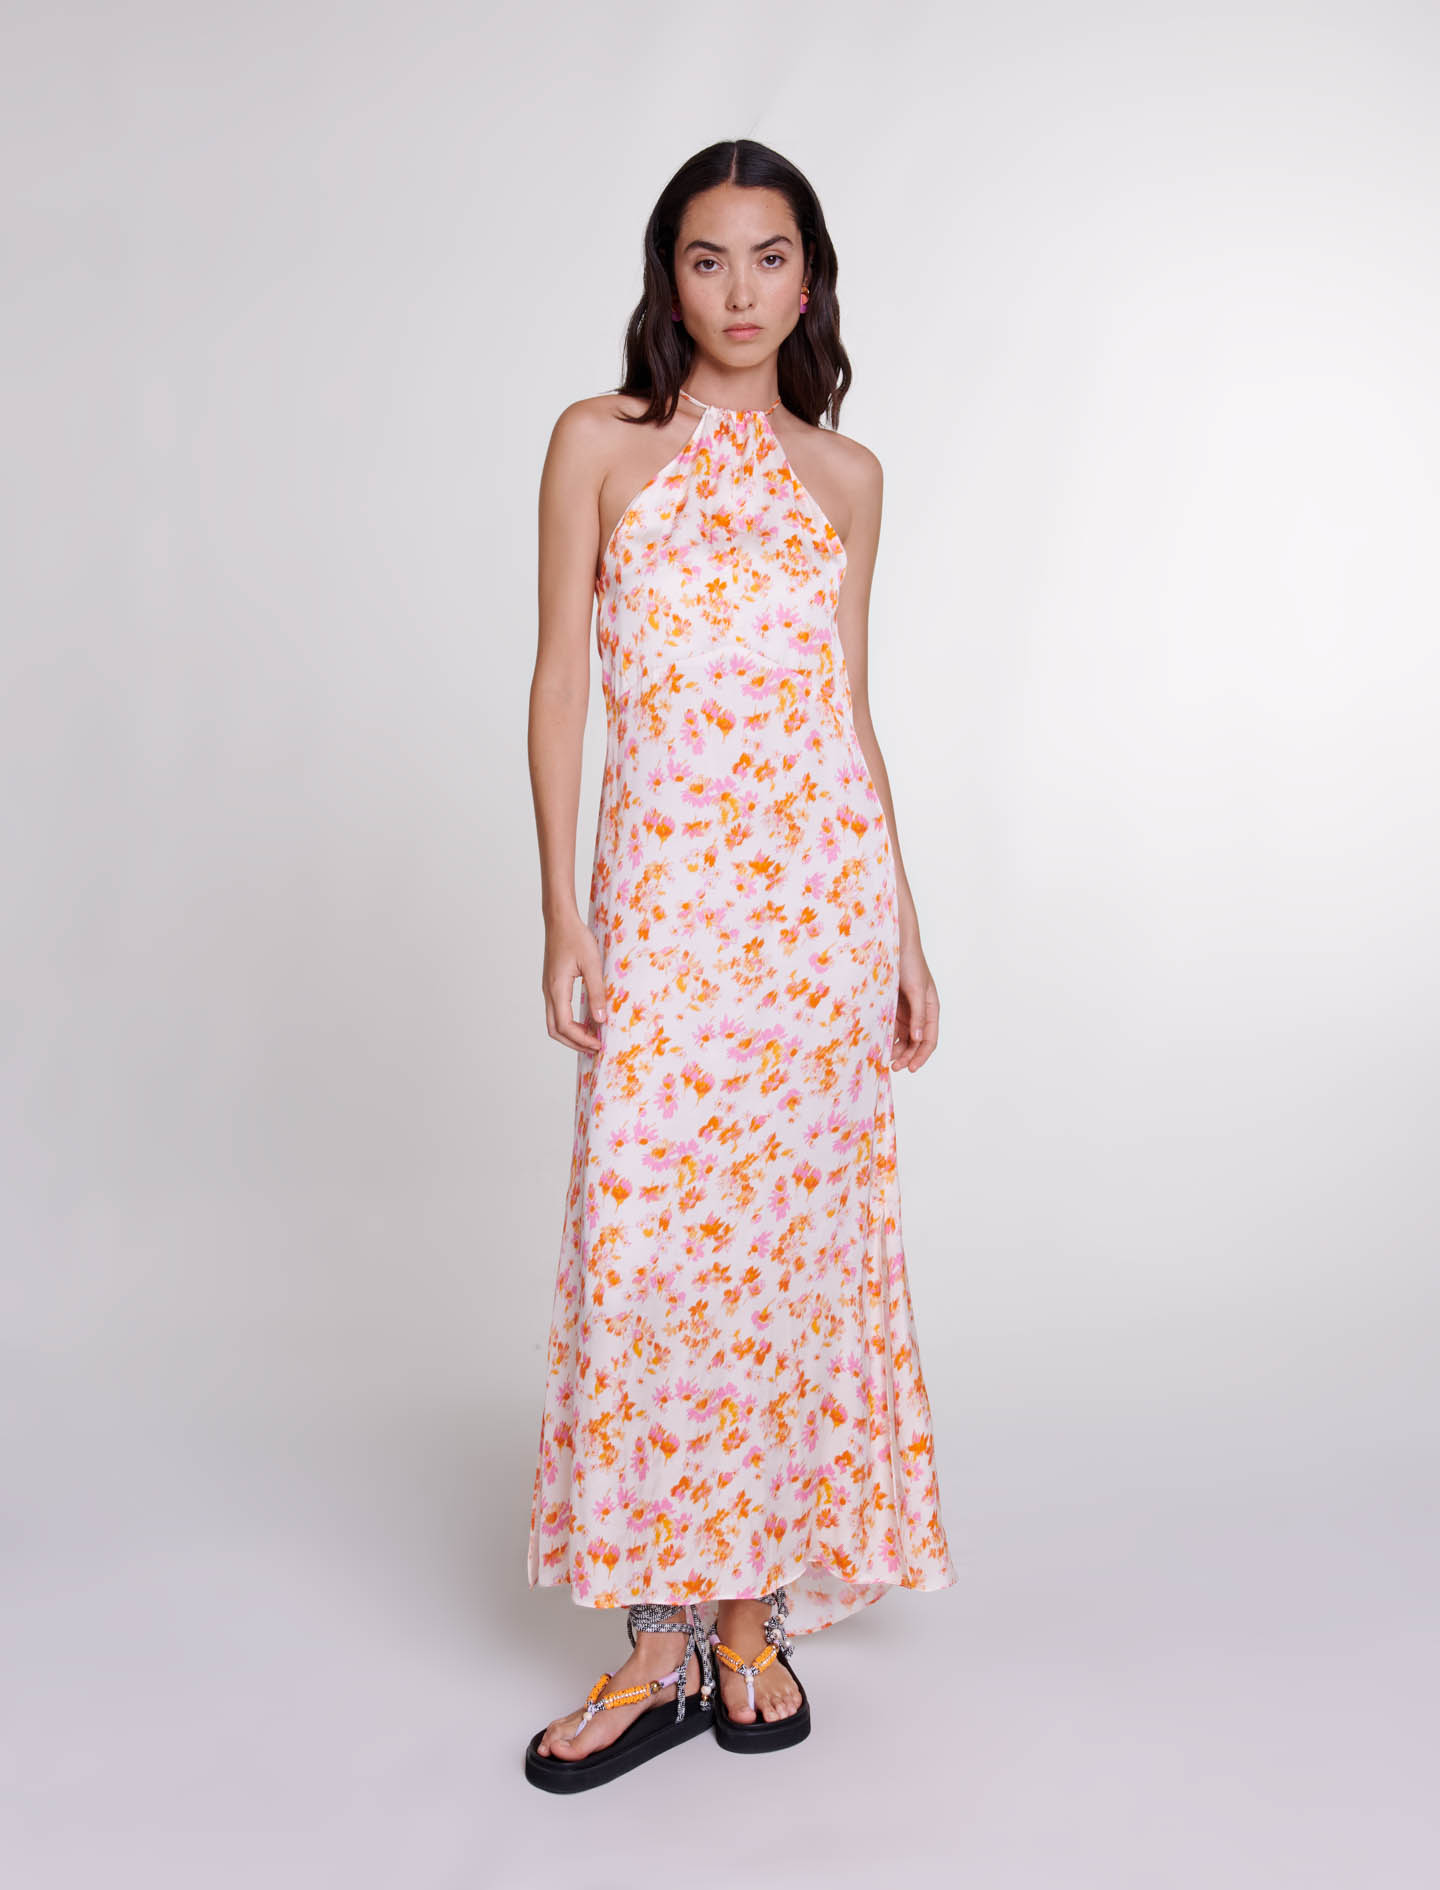 Maje Woman's viscose Lining: Floral satin-effect maxi dress, in color sping orange flower print /